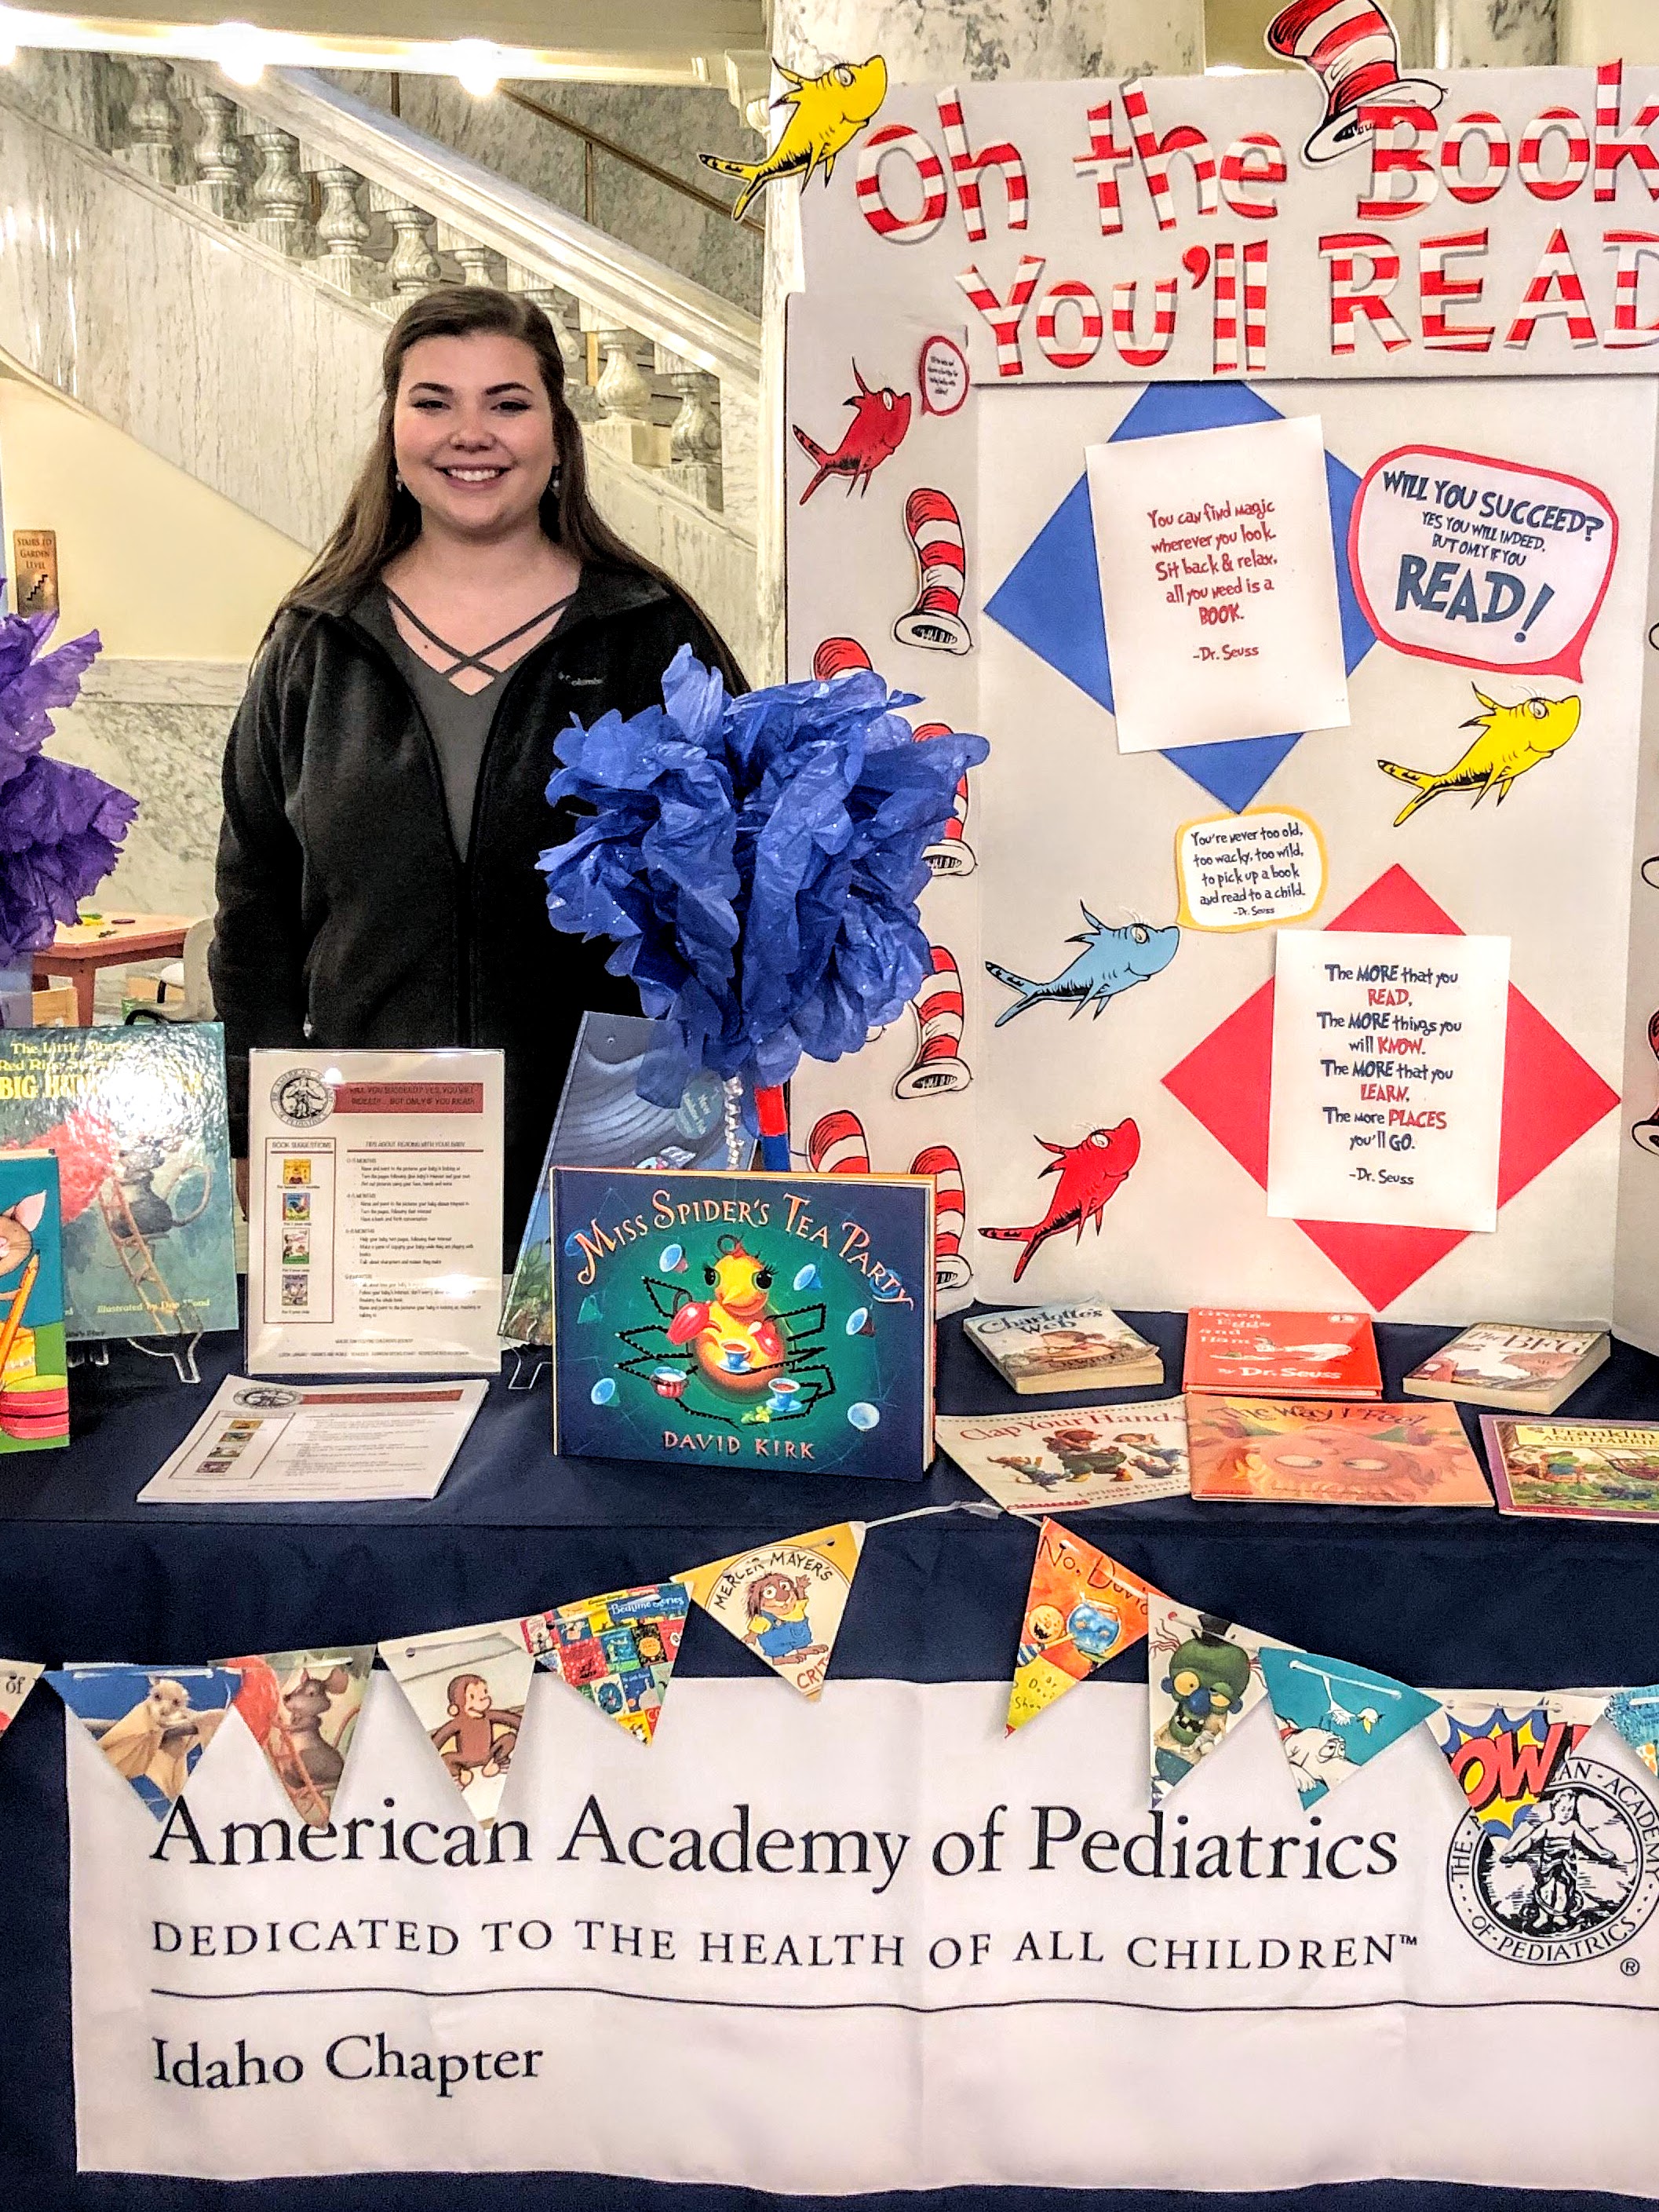 Dani Beaupre standing behind an American Academy of Pediatrics booth